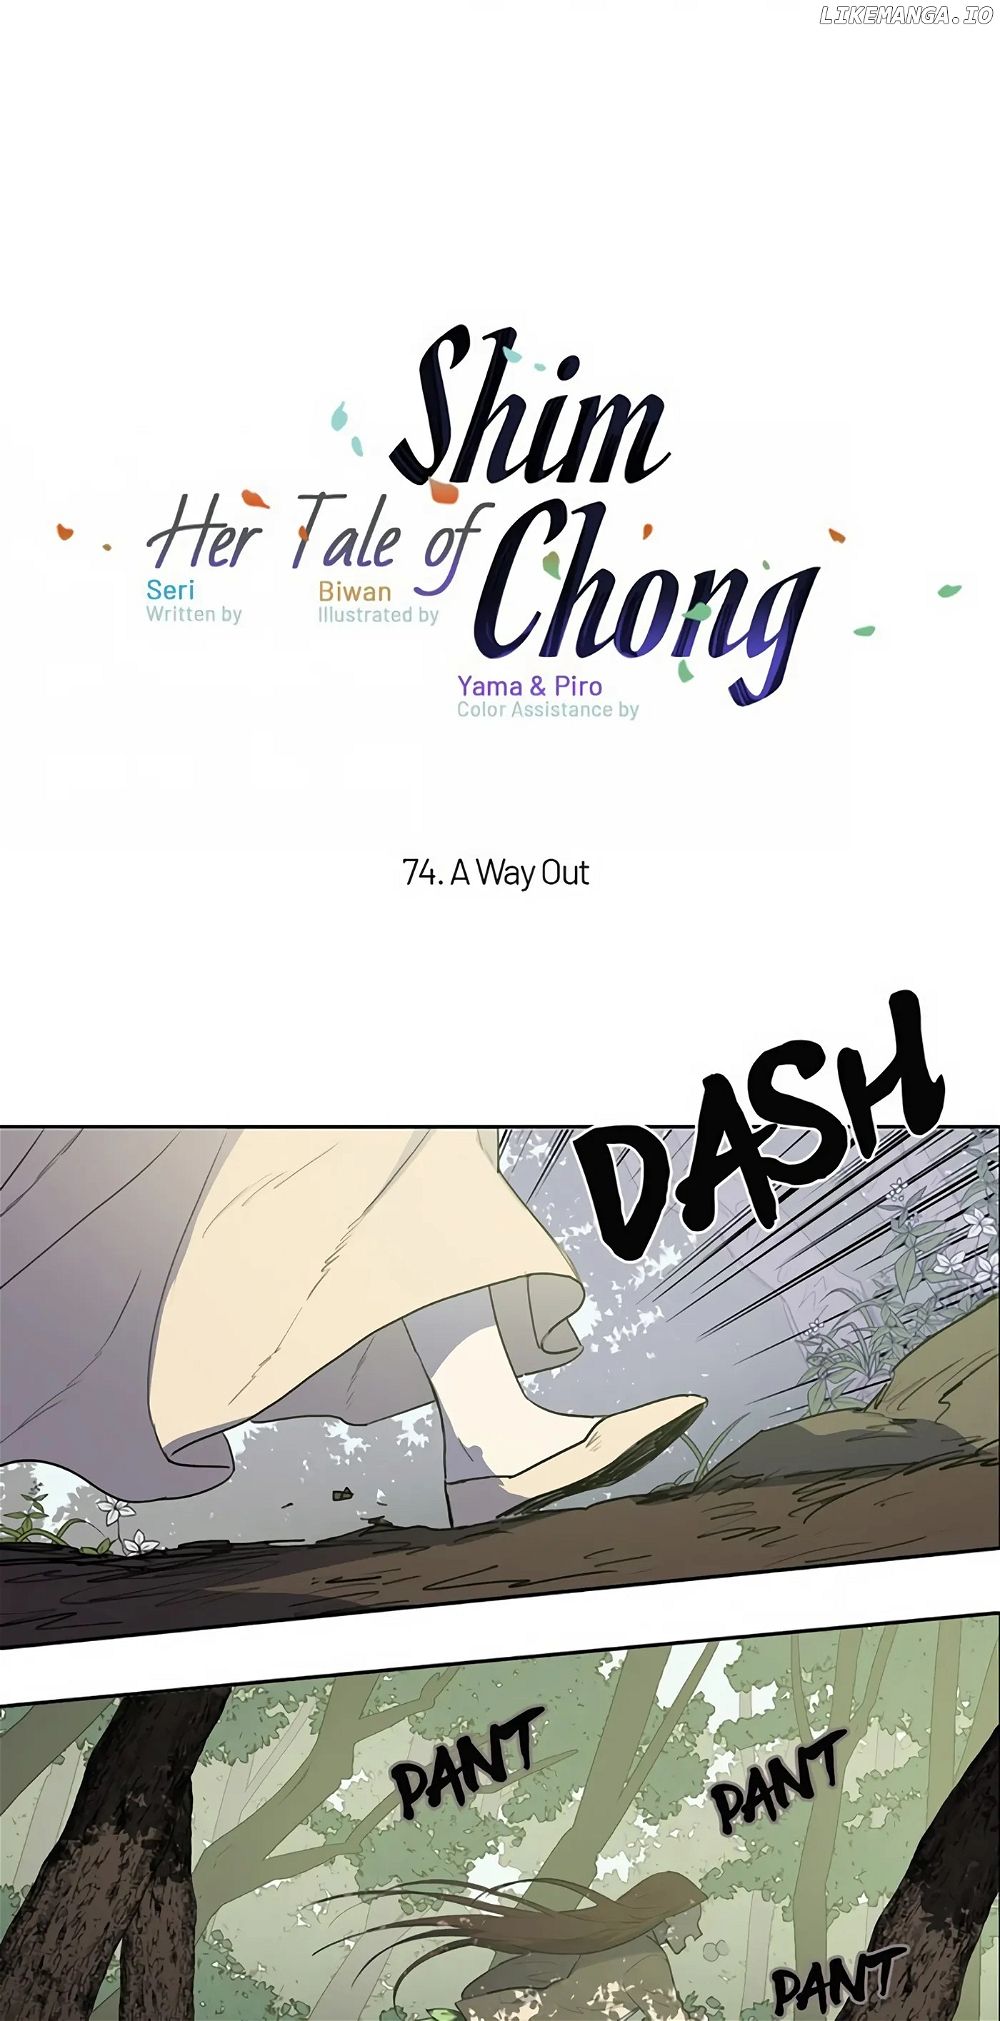 Her Tale of Shim Chong Chapter 74 - Page 1